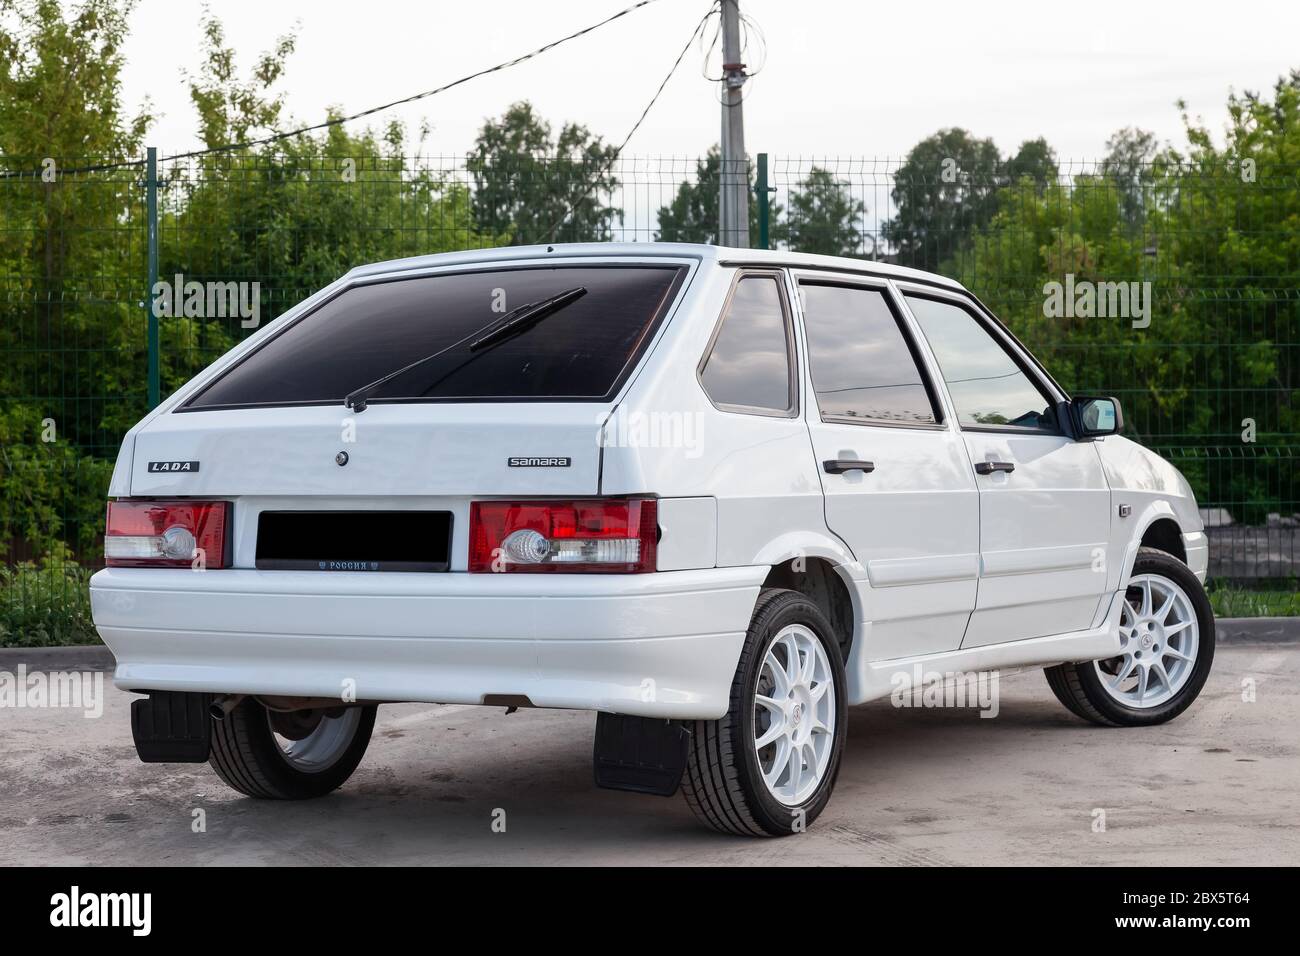 Novosibirsk, Russia - 05.20.2020: Rear view of a new Russian white car brand VAZ model 2114 with red brake lights in good condition on a summer day ag Stock Photo